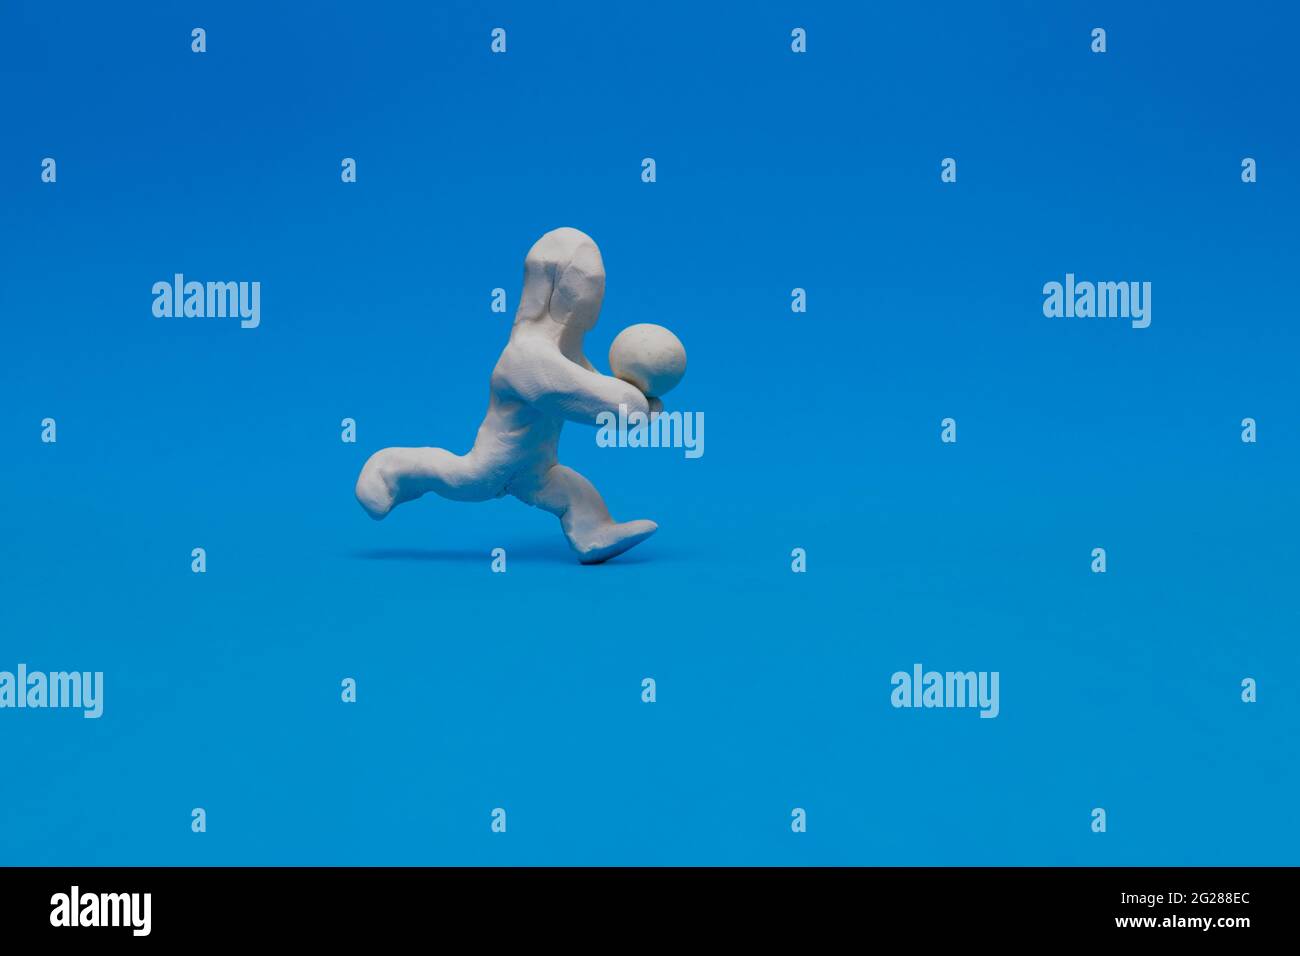 White plasticine doll practicing volleyball on a blue background. The doll is receiving the ball hitting it with his forearms. Stock Photo